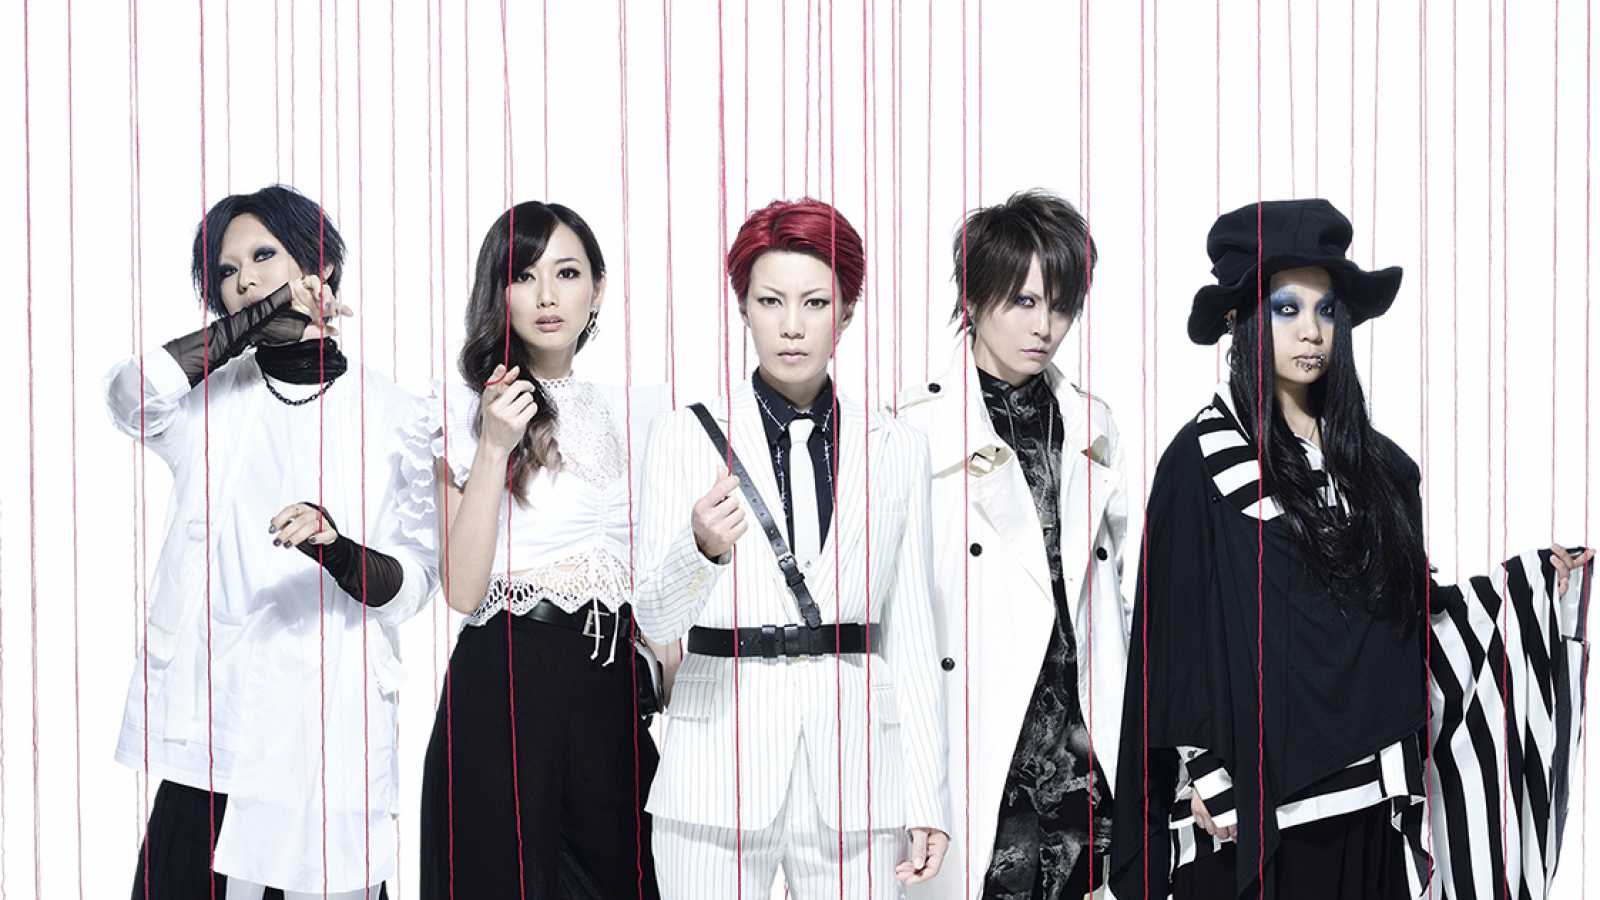 exist†trace © Monster's inc All Rights Reserved.